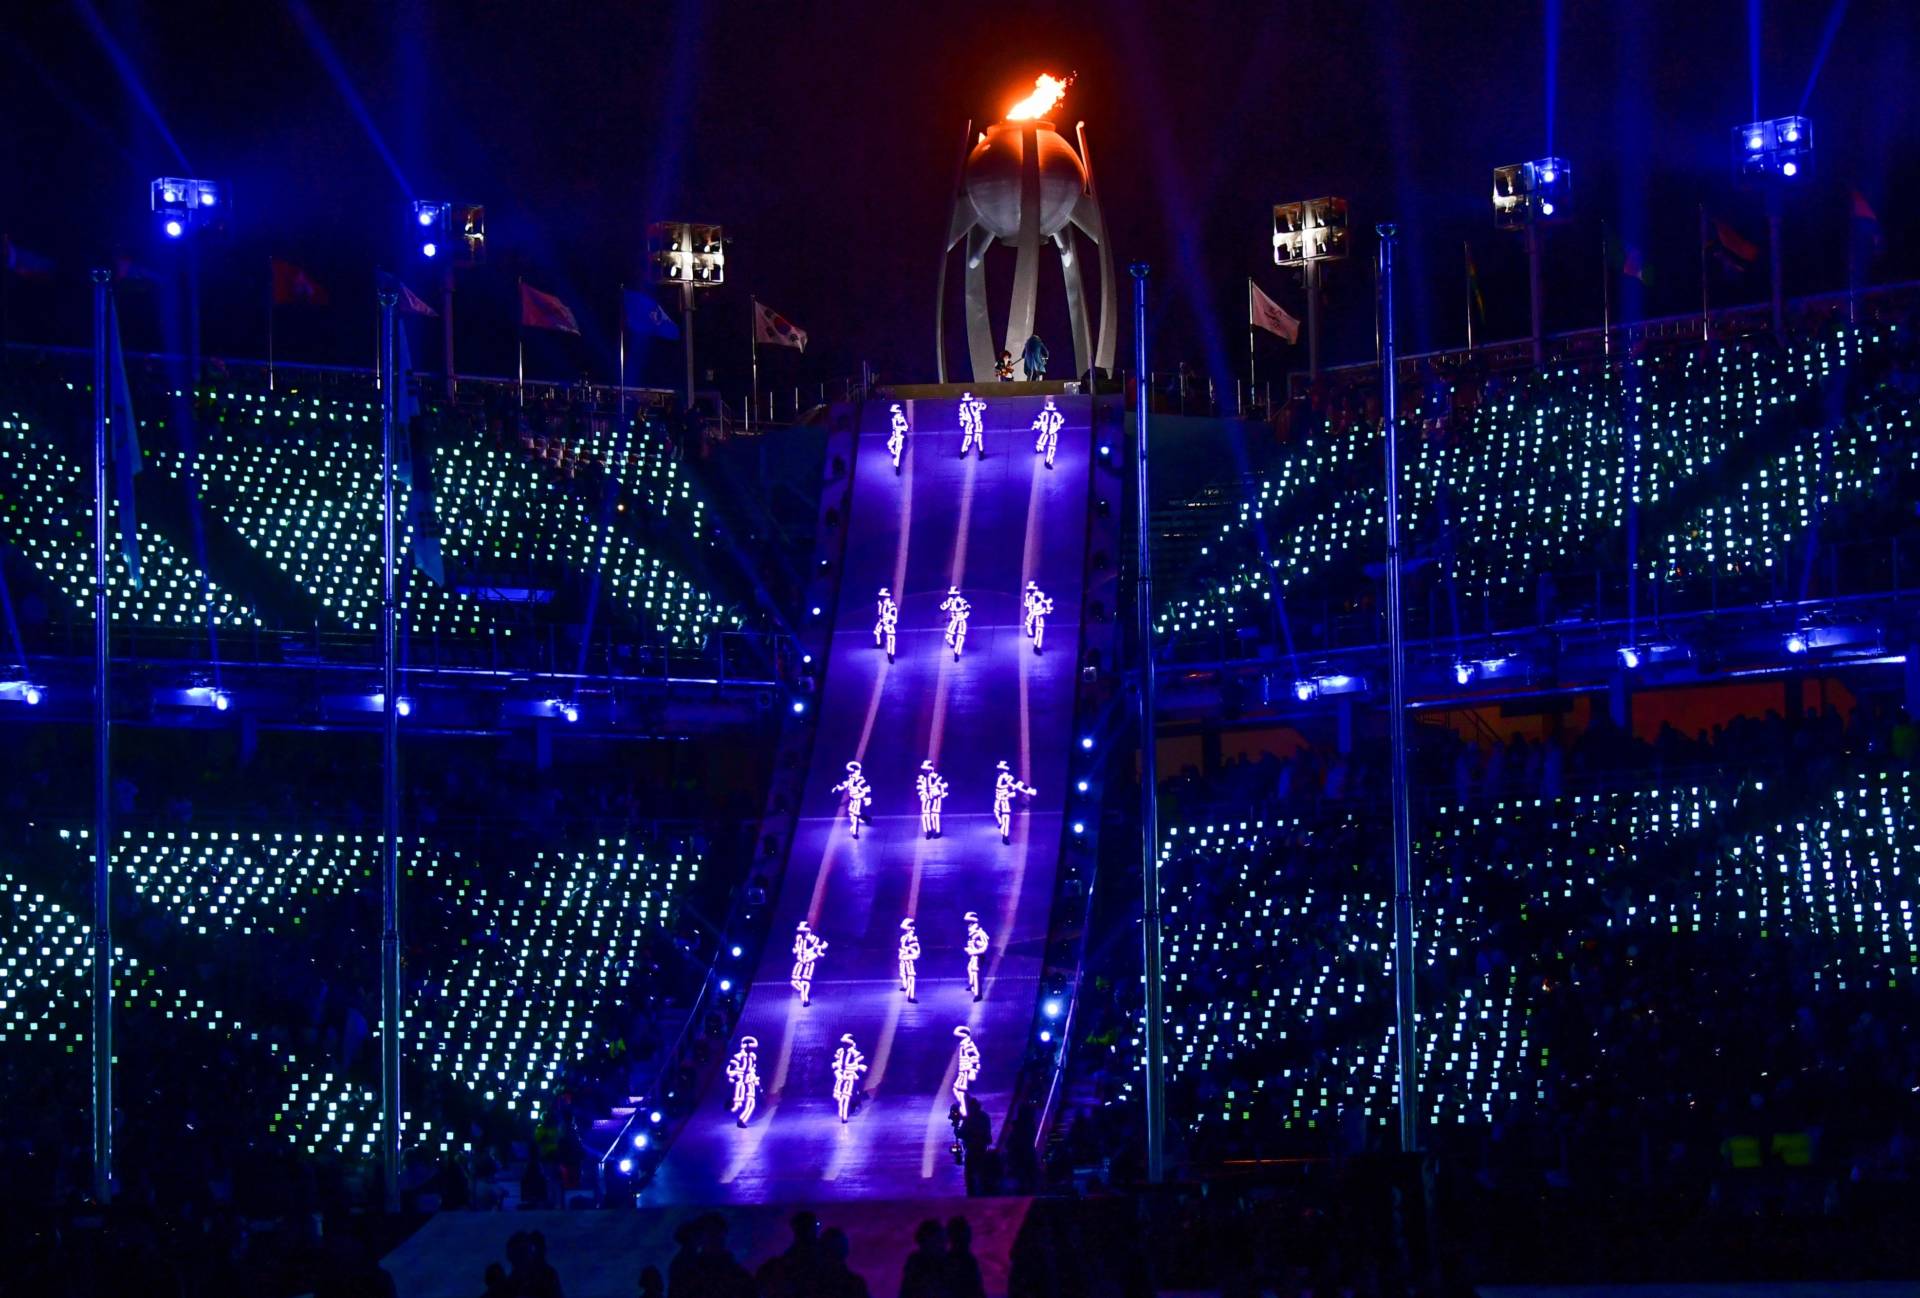 Artists perform near the Olympic flame during the closing ceremony. "Although parting is sad, we will remember Pyeongchang with beautiful memories," said Lee Hee-beom, the Pyeongchang Olympics organizing committee president.
 Martin Bernetti/AFP/Getty Images